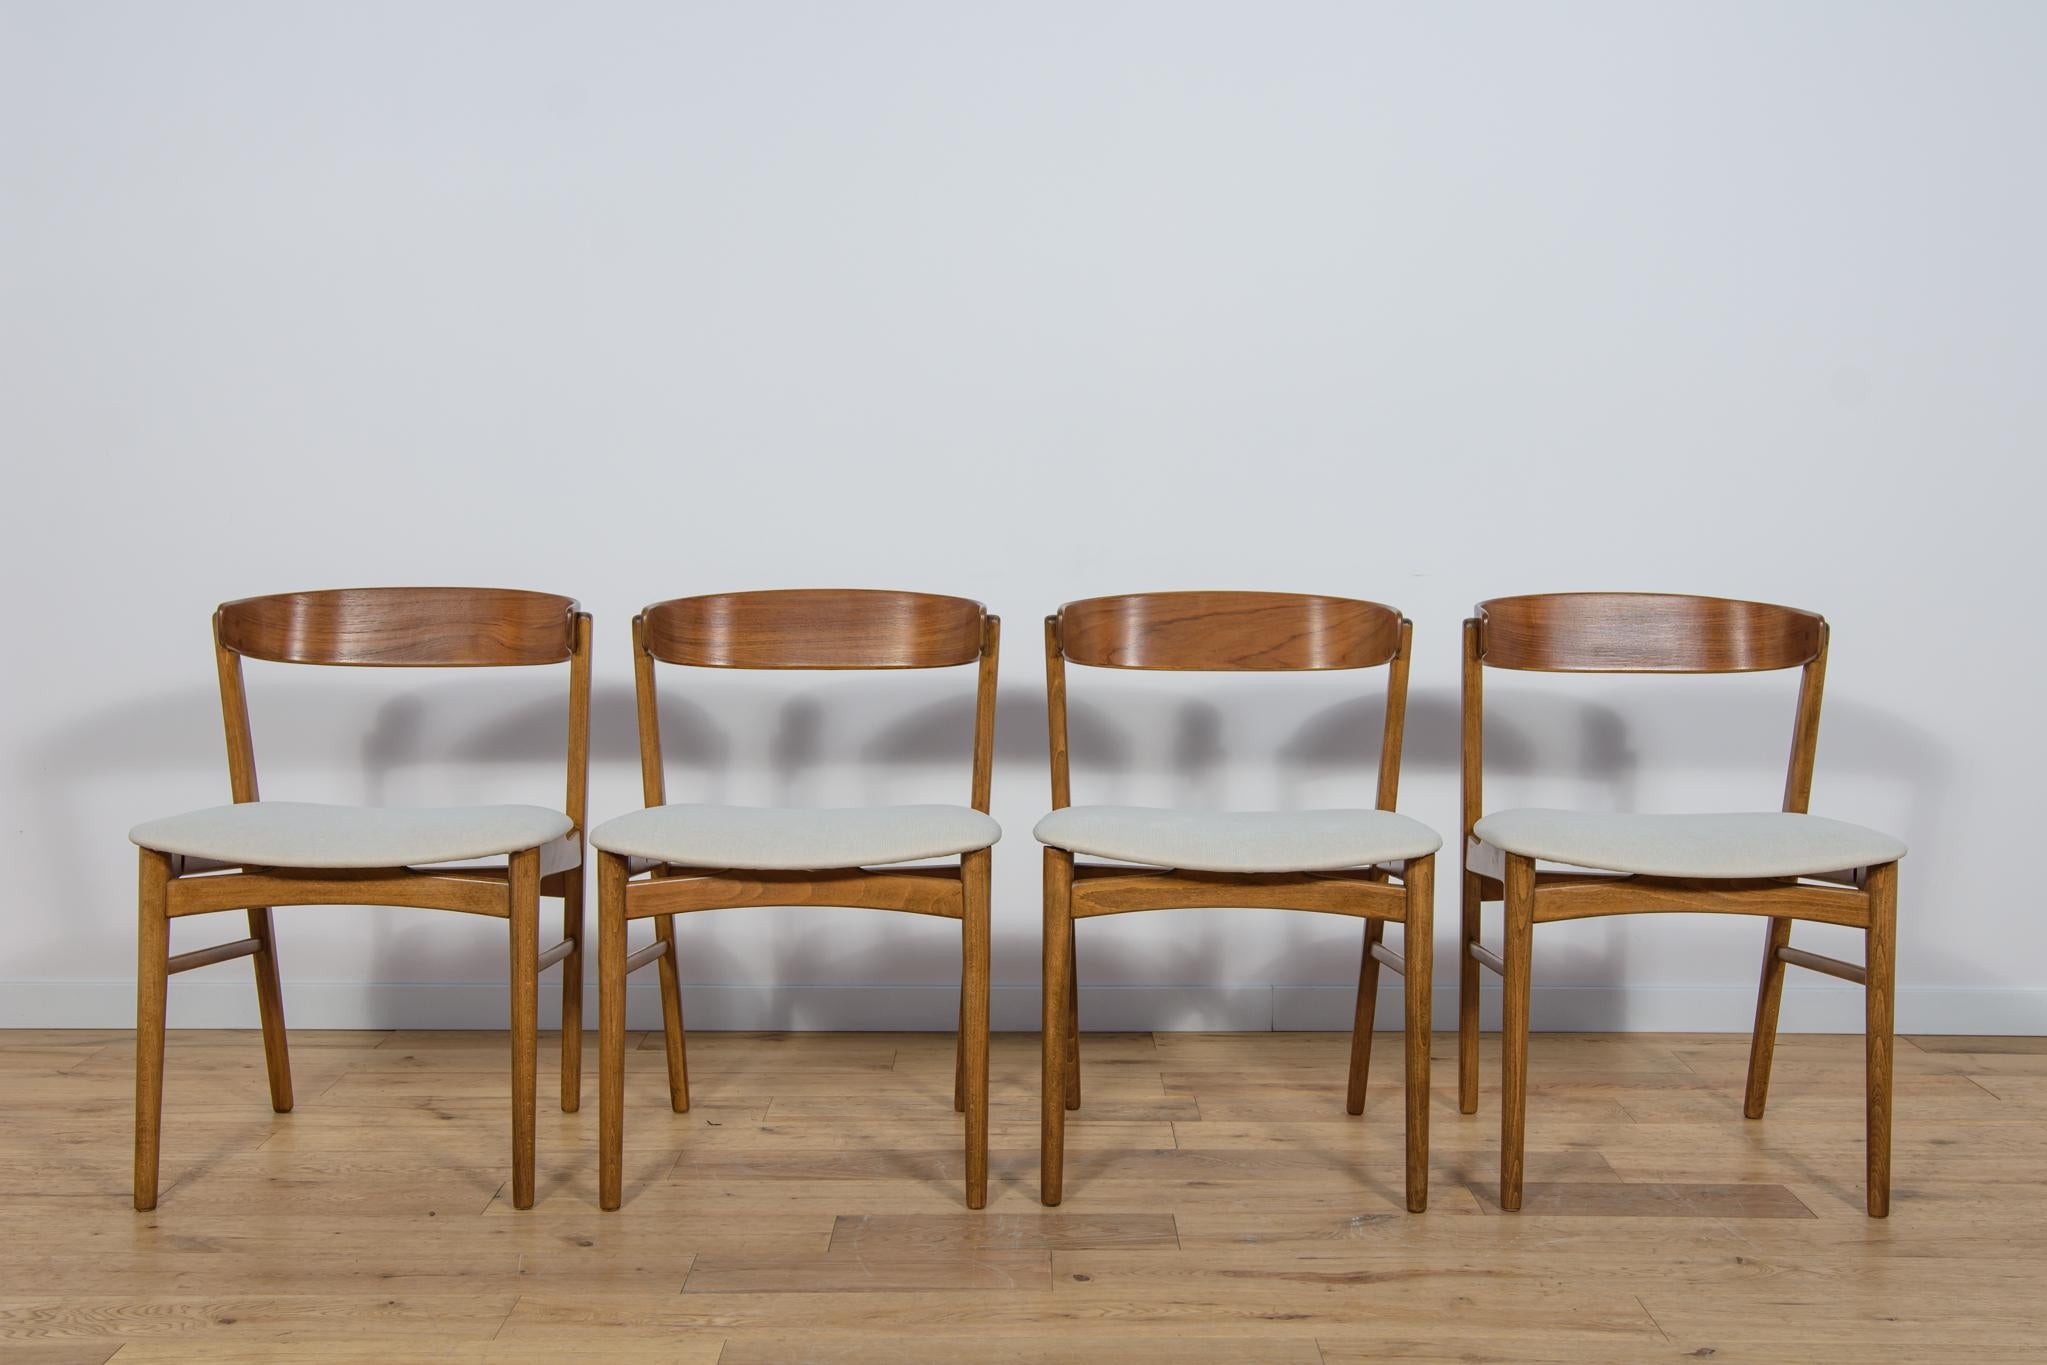 Dining chairs Model 210 made by Farstrup in Denmark in the 1960s. The frame is made of beech wood, the backrests are made of teak, the whole has been cleaned of the old surface, painted oak stain and finished with a semi-matt lacquer . The foams